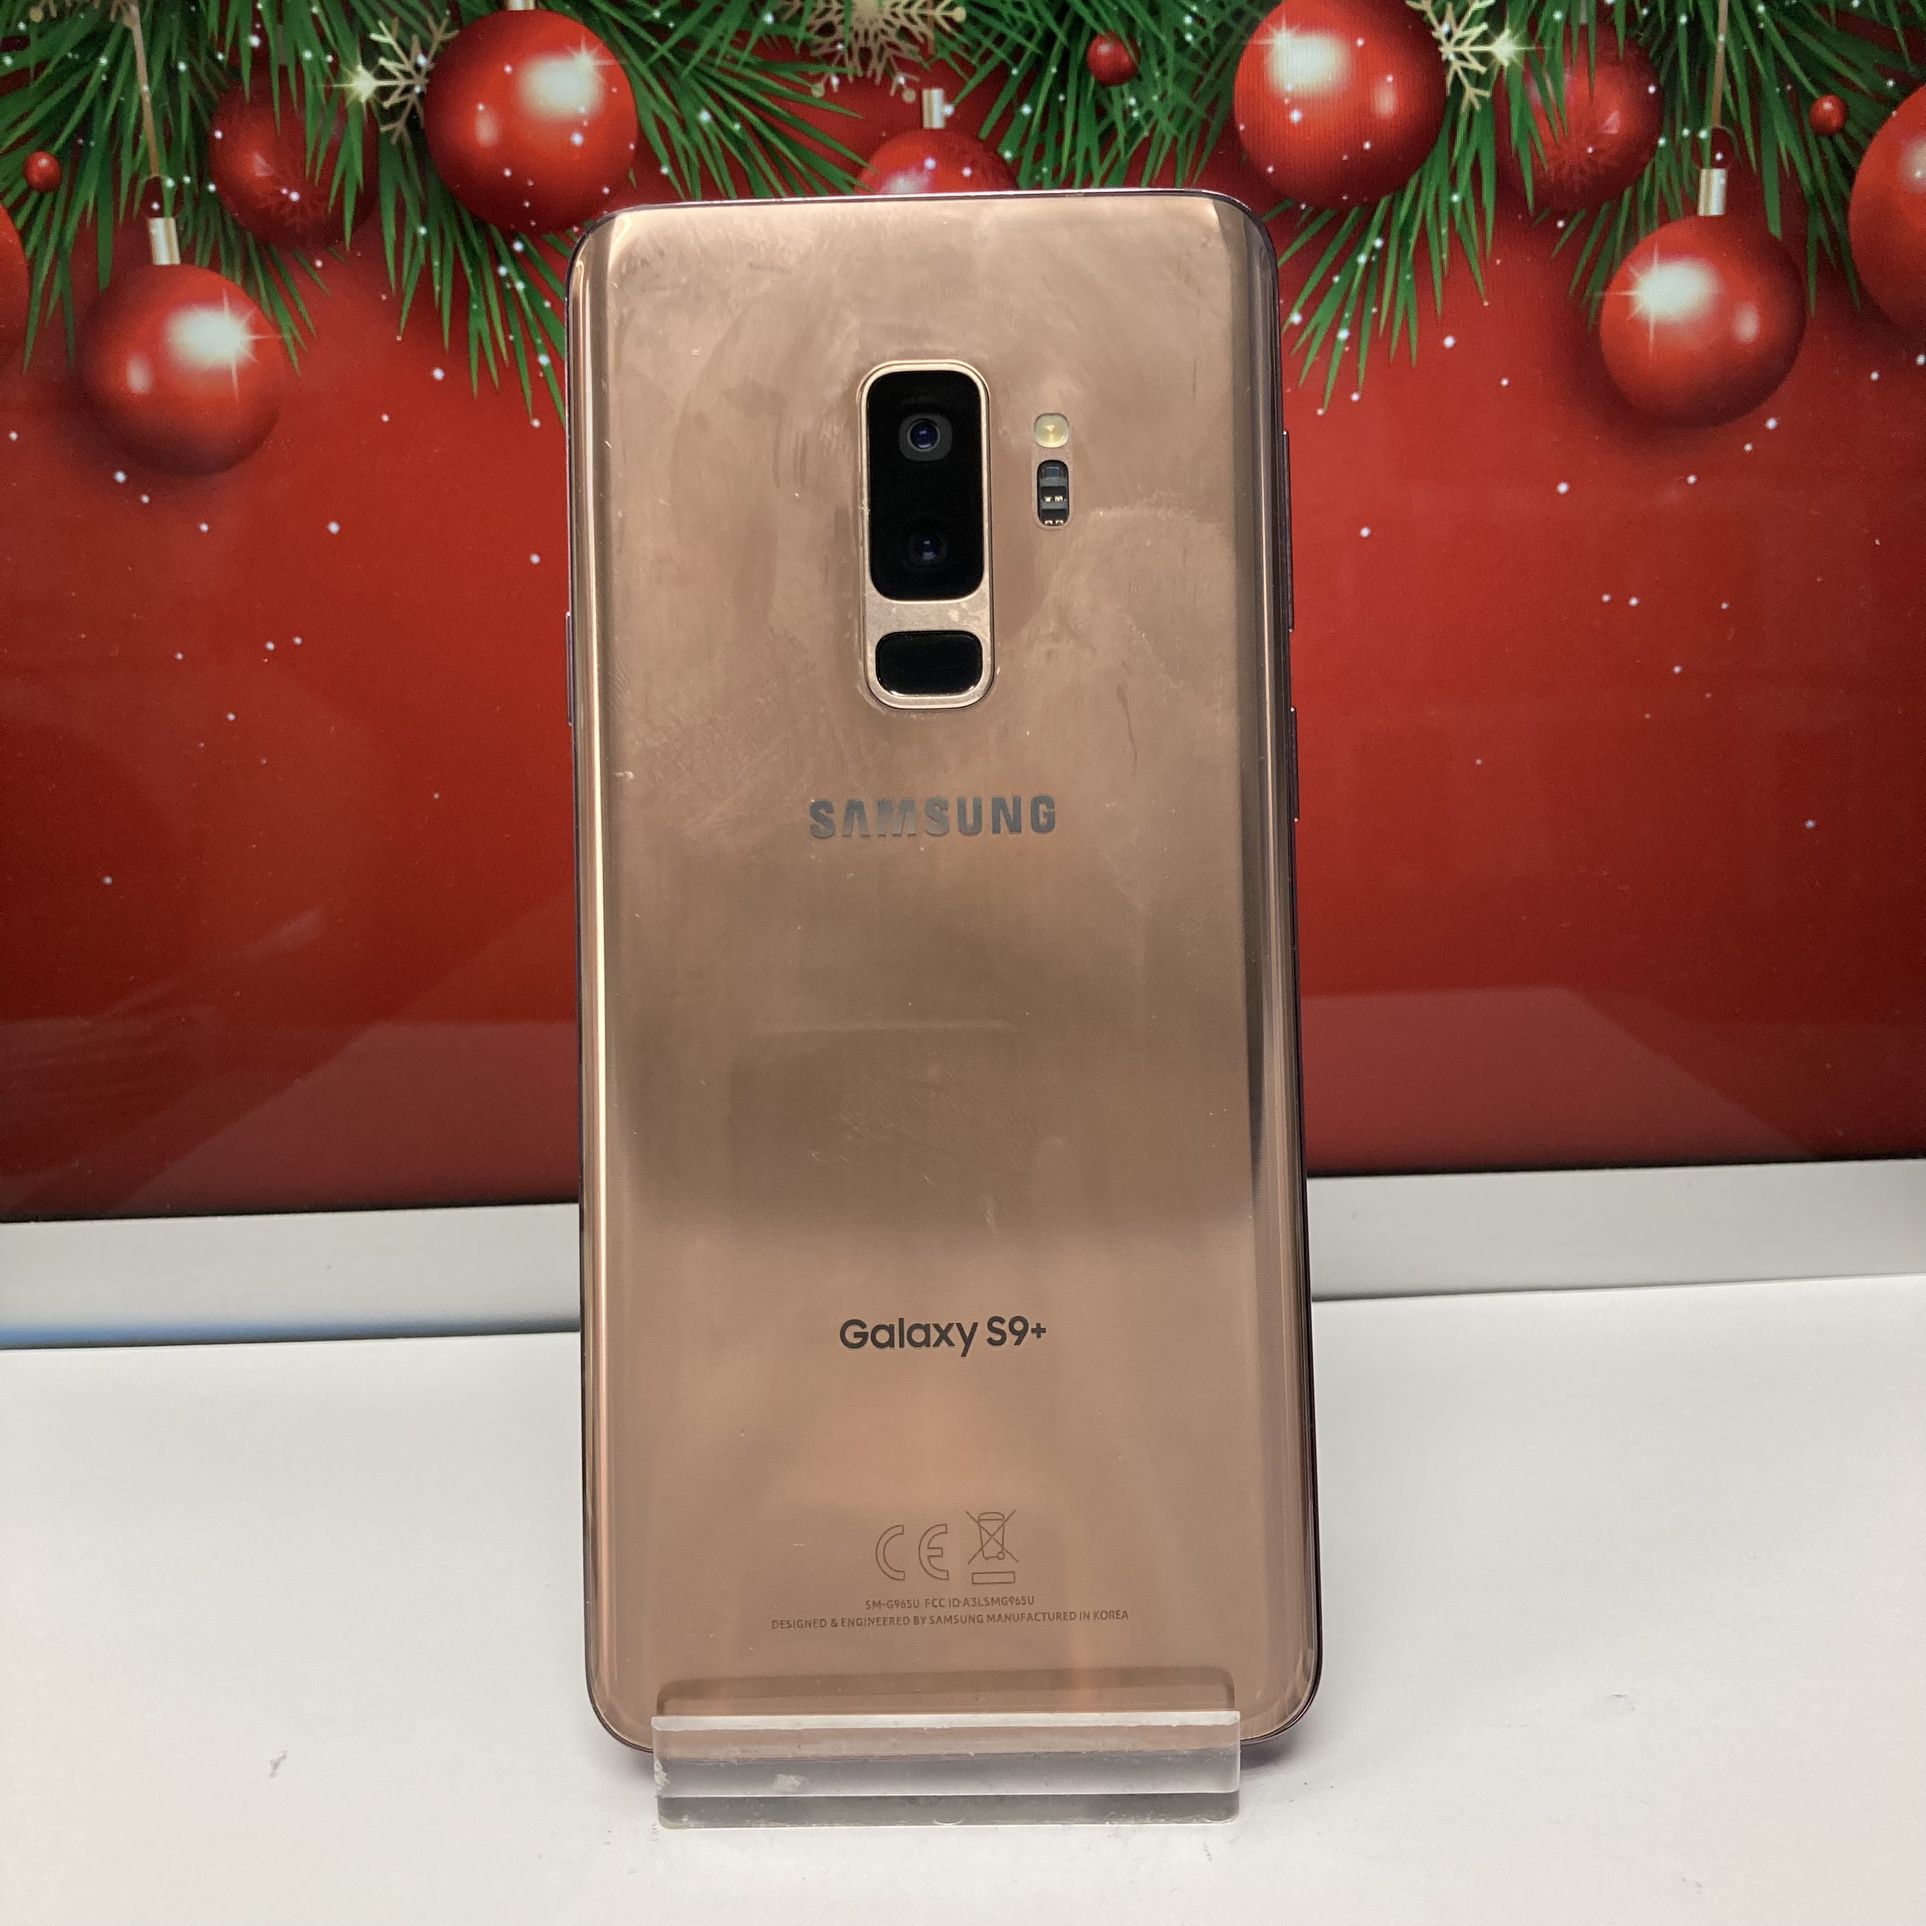 Samsung Galaxy S9 Plus, 64 gb, Comes with store warranty along with charger and cable 